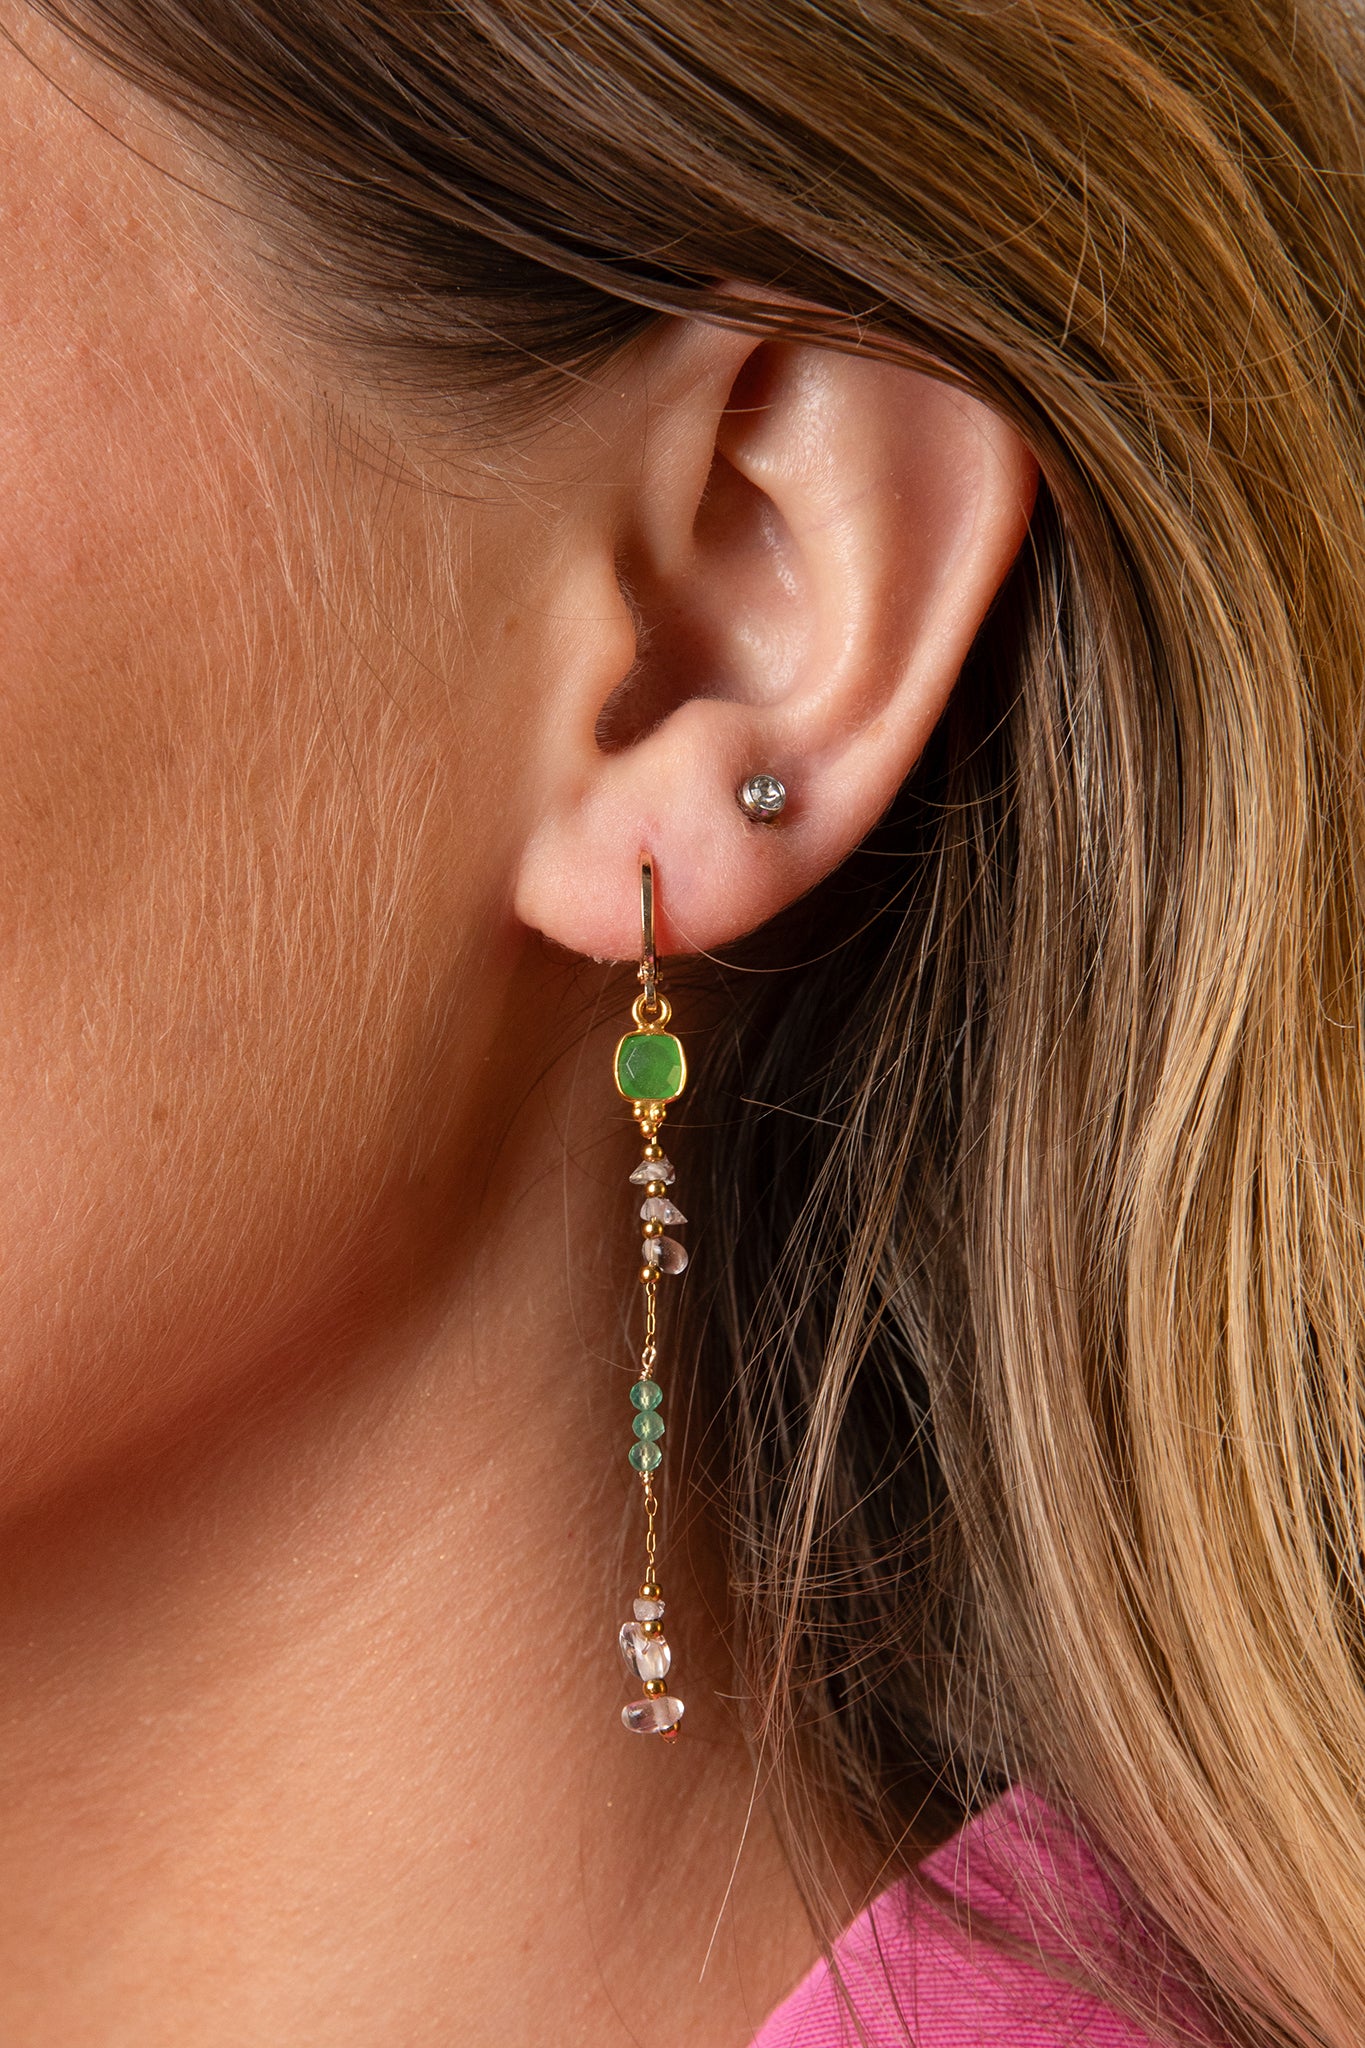 SG12 - Element earrings with Chrysoprase and Clear Quartz